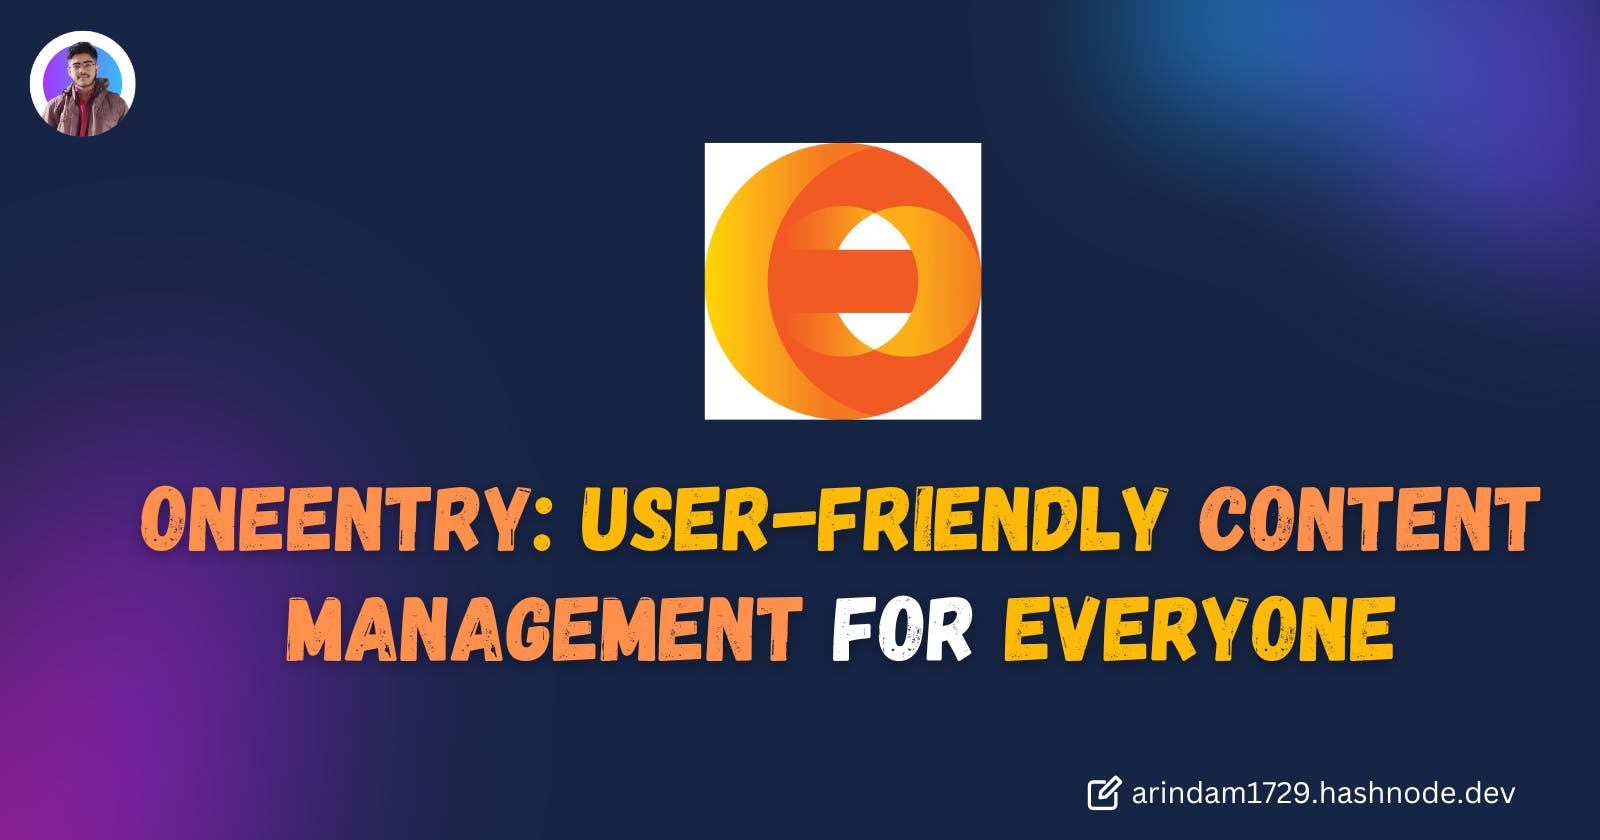 OneEntry: User-Friendly Content Management for Everyone